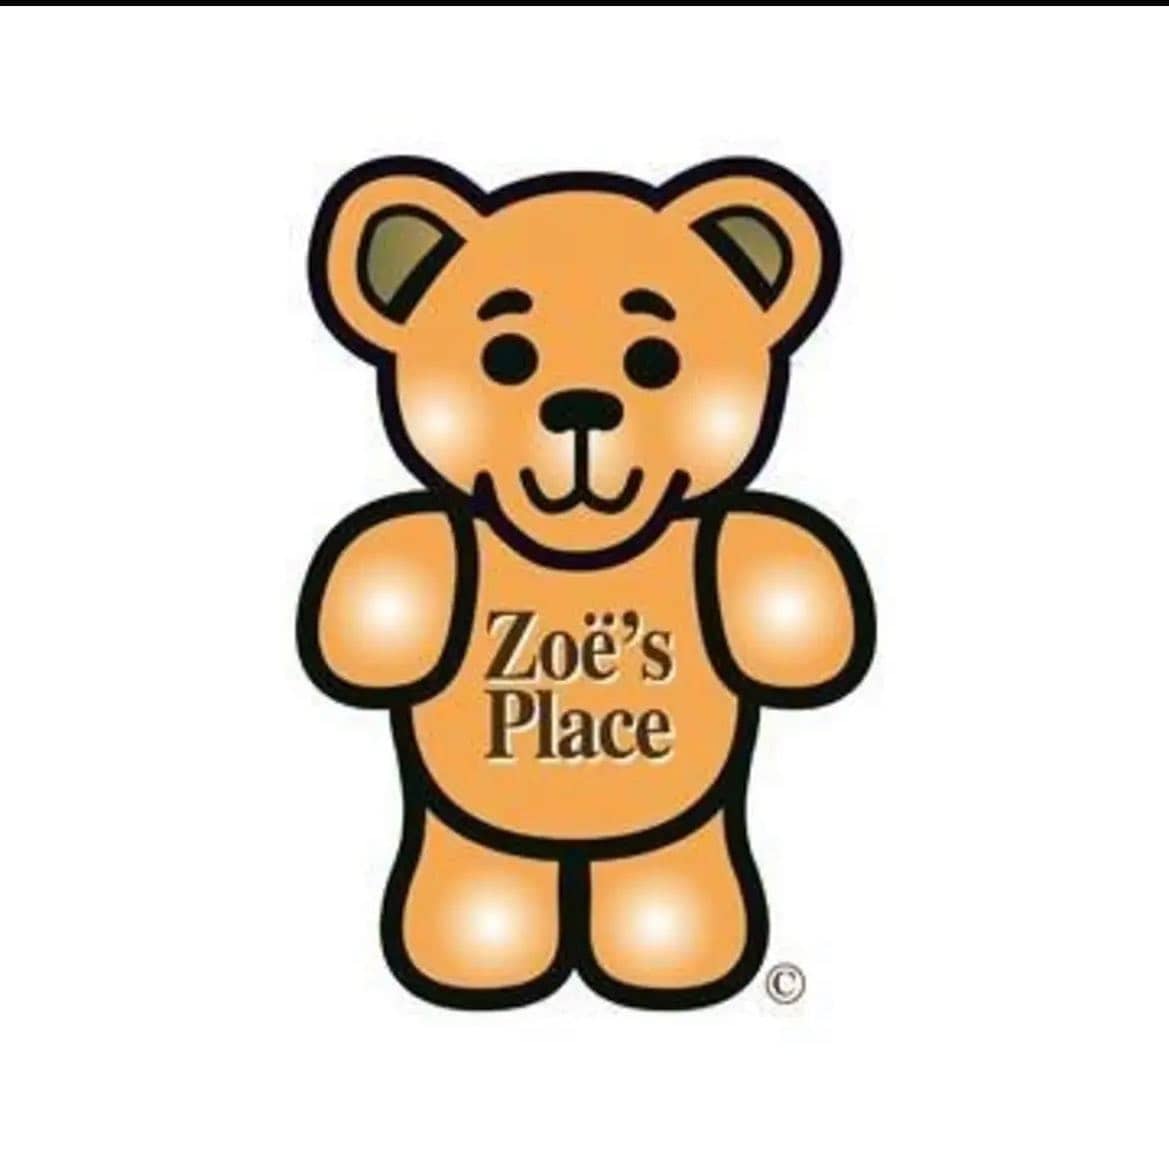 This Charity Tuesday we're celebrating @zoesplaceliverpool who are joining the Peak District Chal...